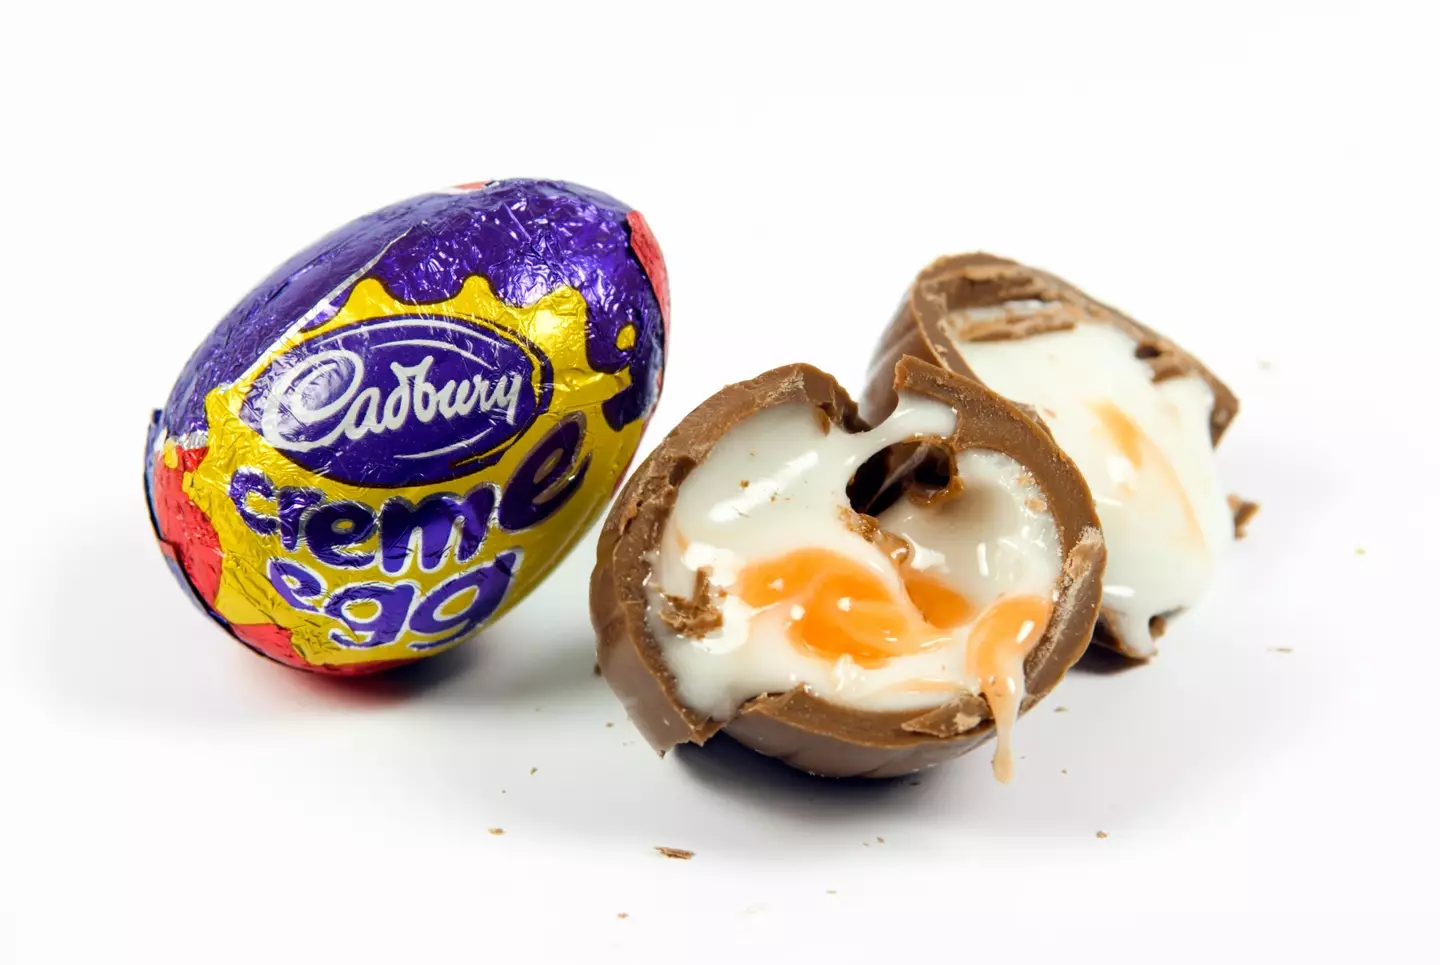 "I love a Creme Egg but this is shocking."